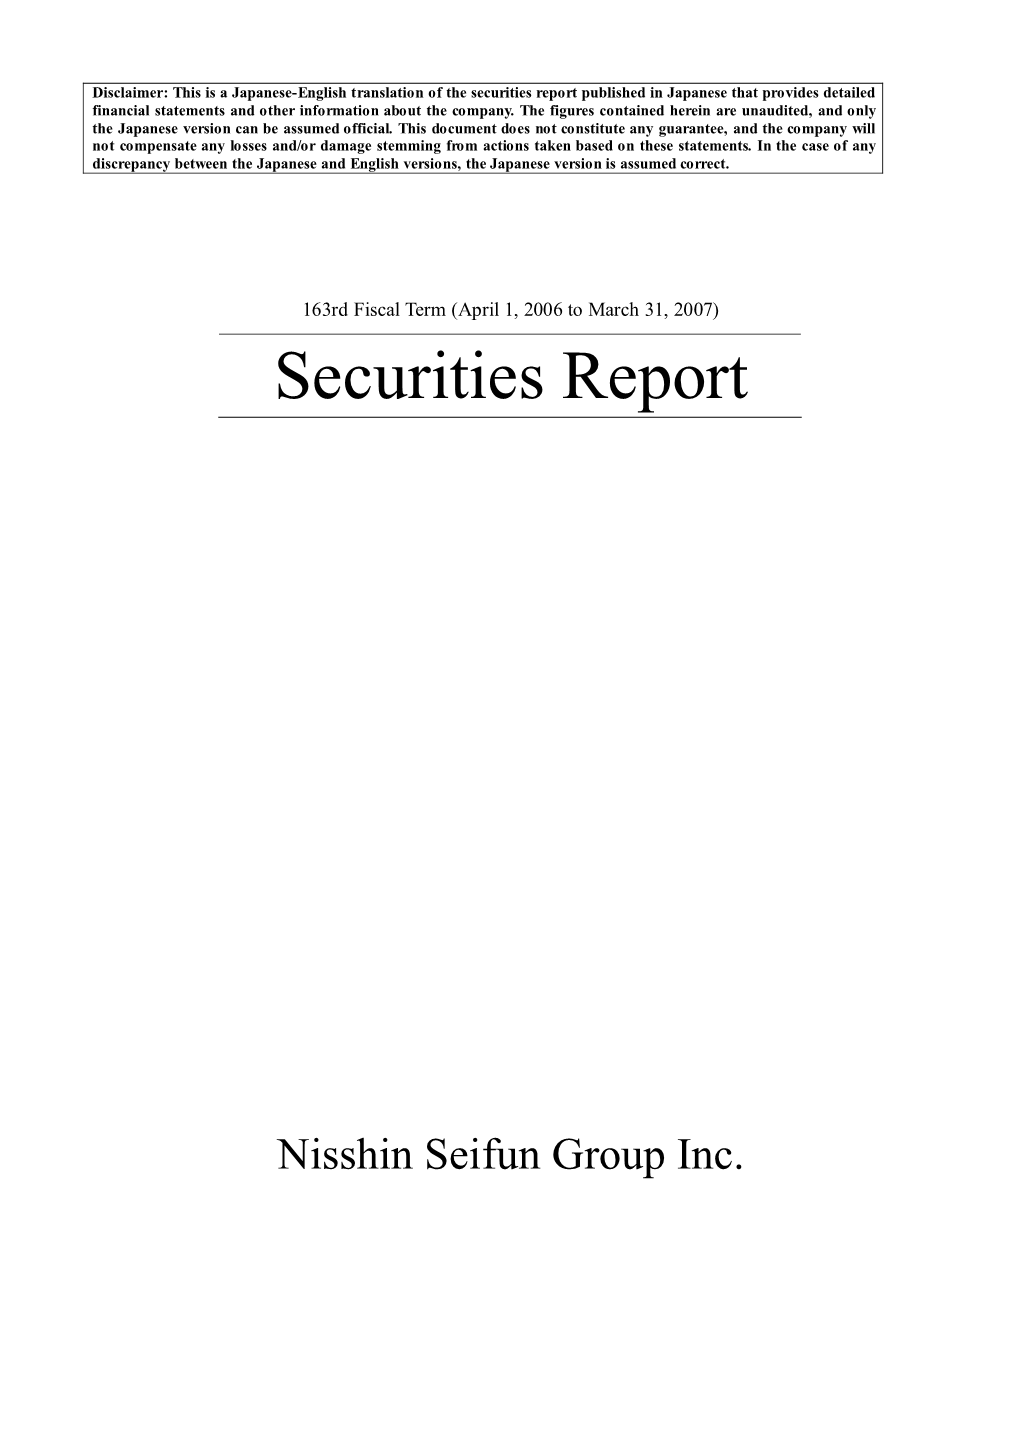 Securities Report 163Rd Fiscal Term (April 1, 2006 to March 31, 2007)